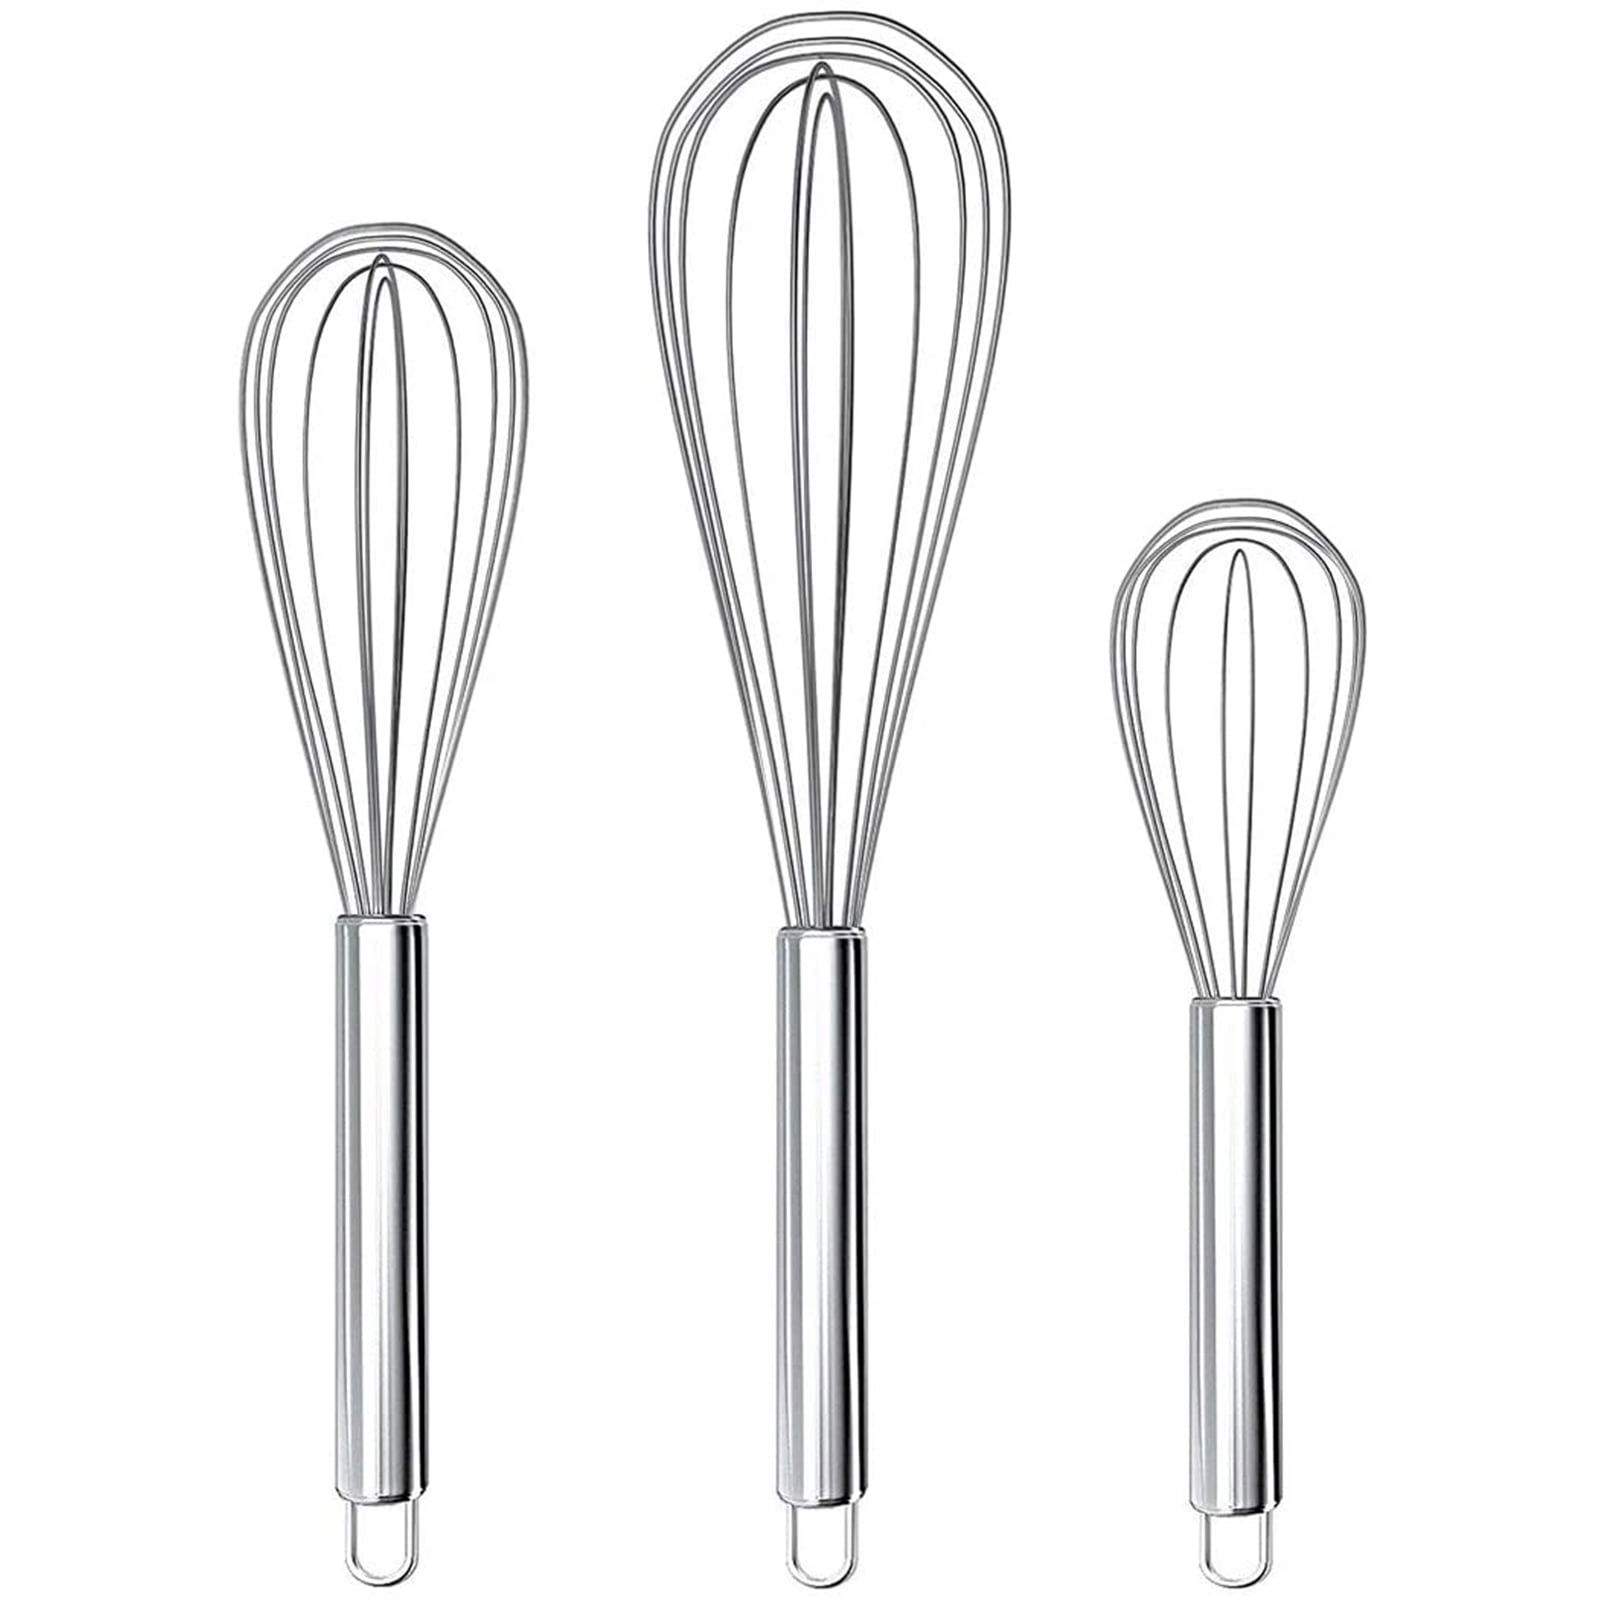 Stainless Steel Spring Coil Whisk Wire Whip Cream Egg Beater Gravy Cream  Hand Mixer Kitchen Tool Accessories For Mixing, Blending, Beating,  Stirring